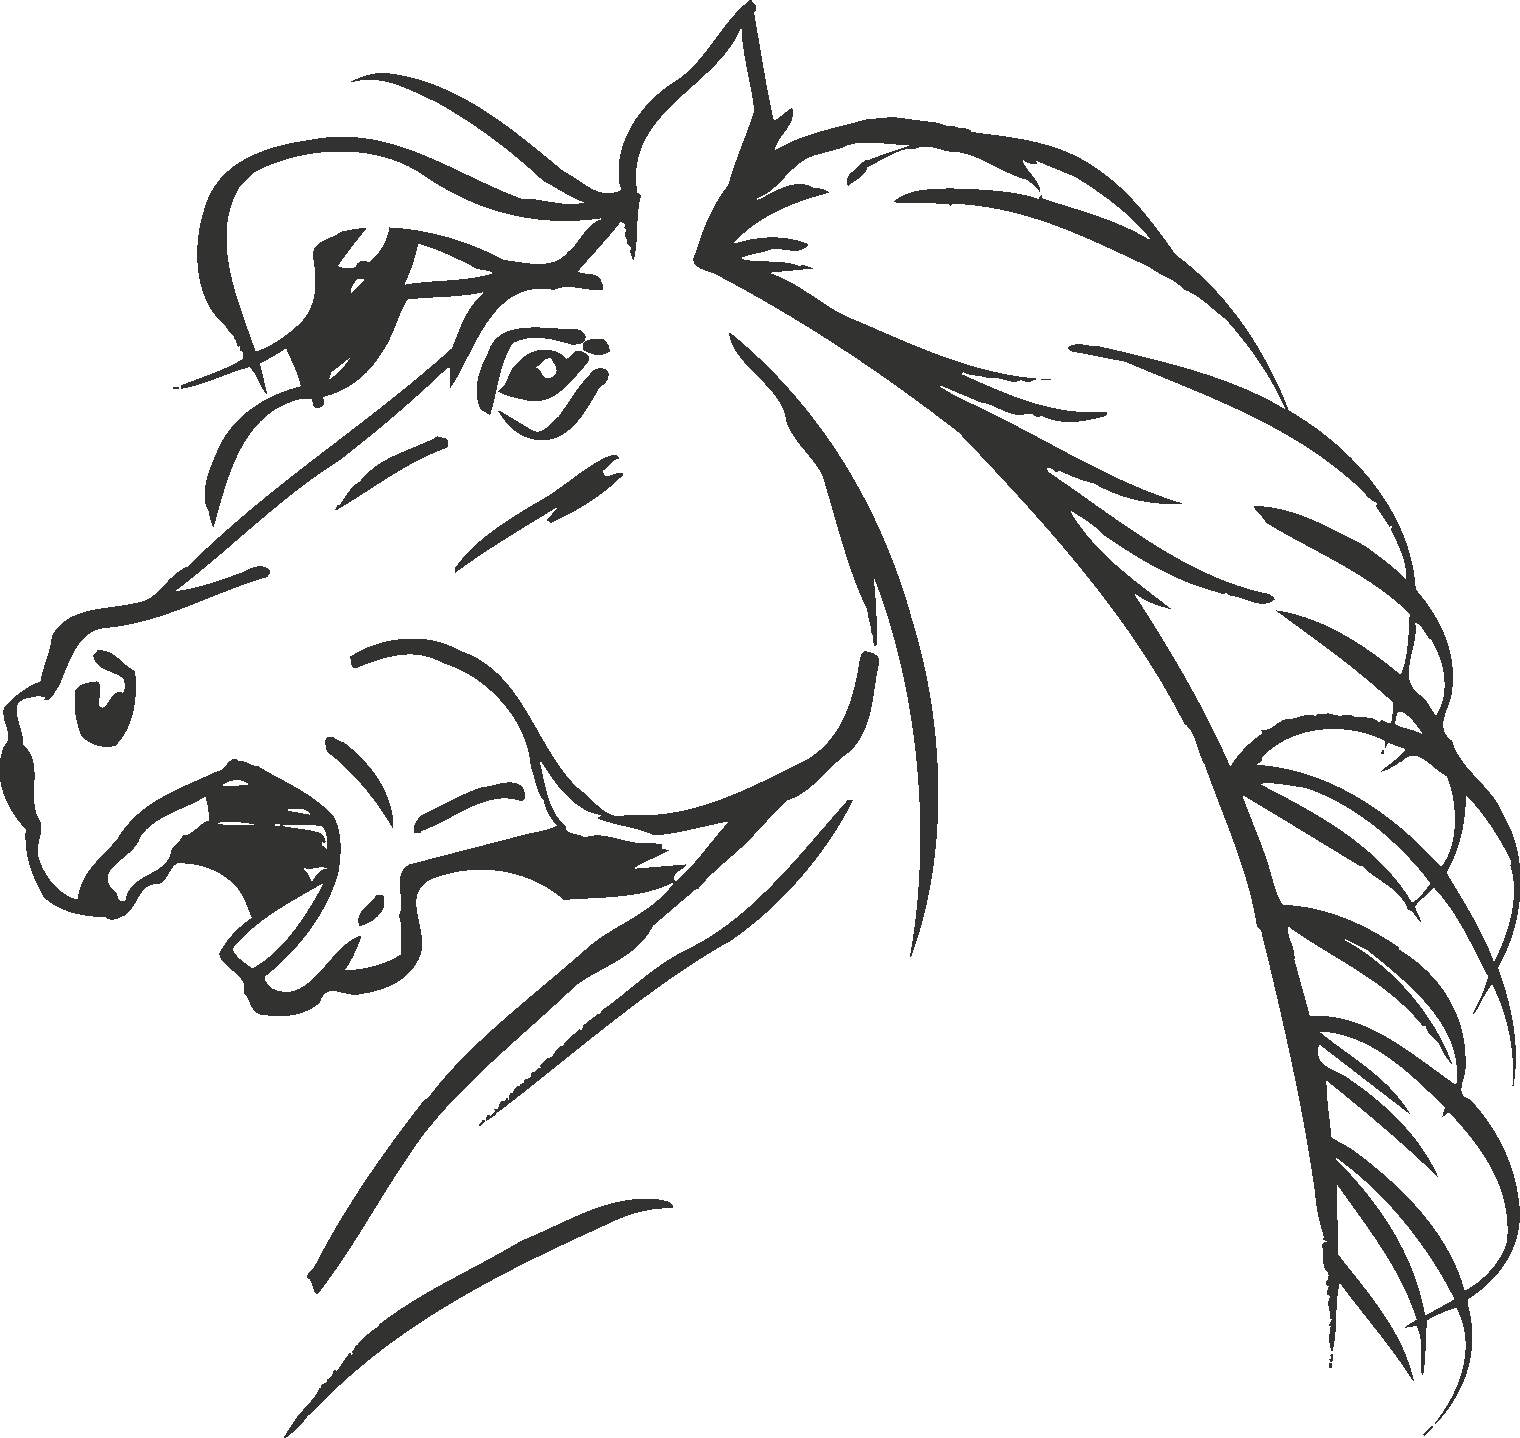 12 Horse Head Black And White Vectors [eps File] - Wall Decal (1520x1438)